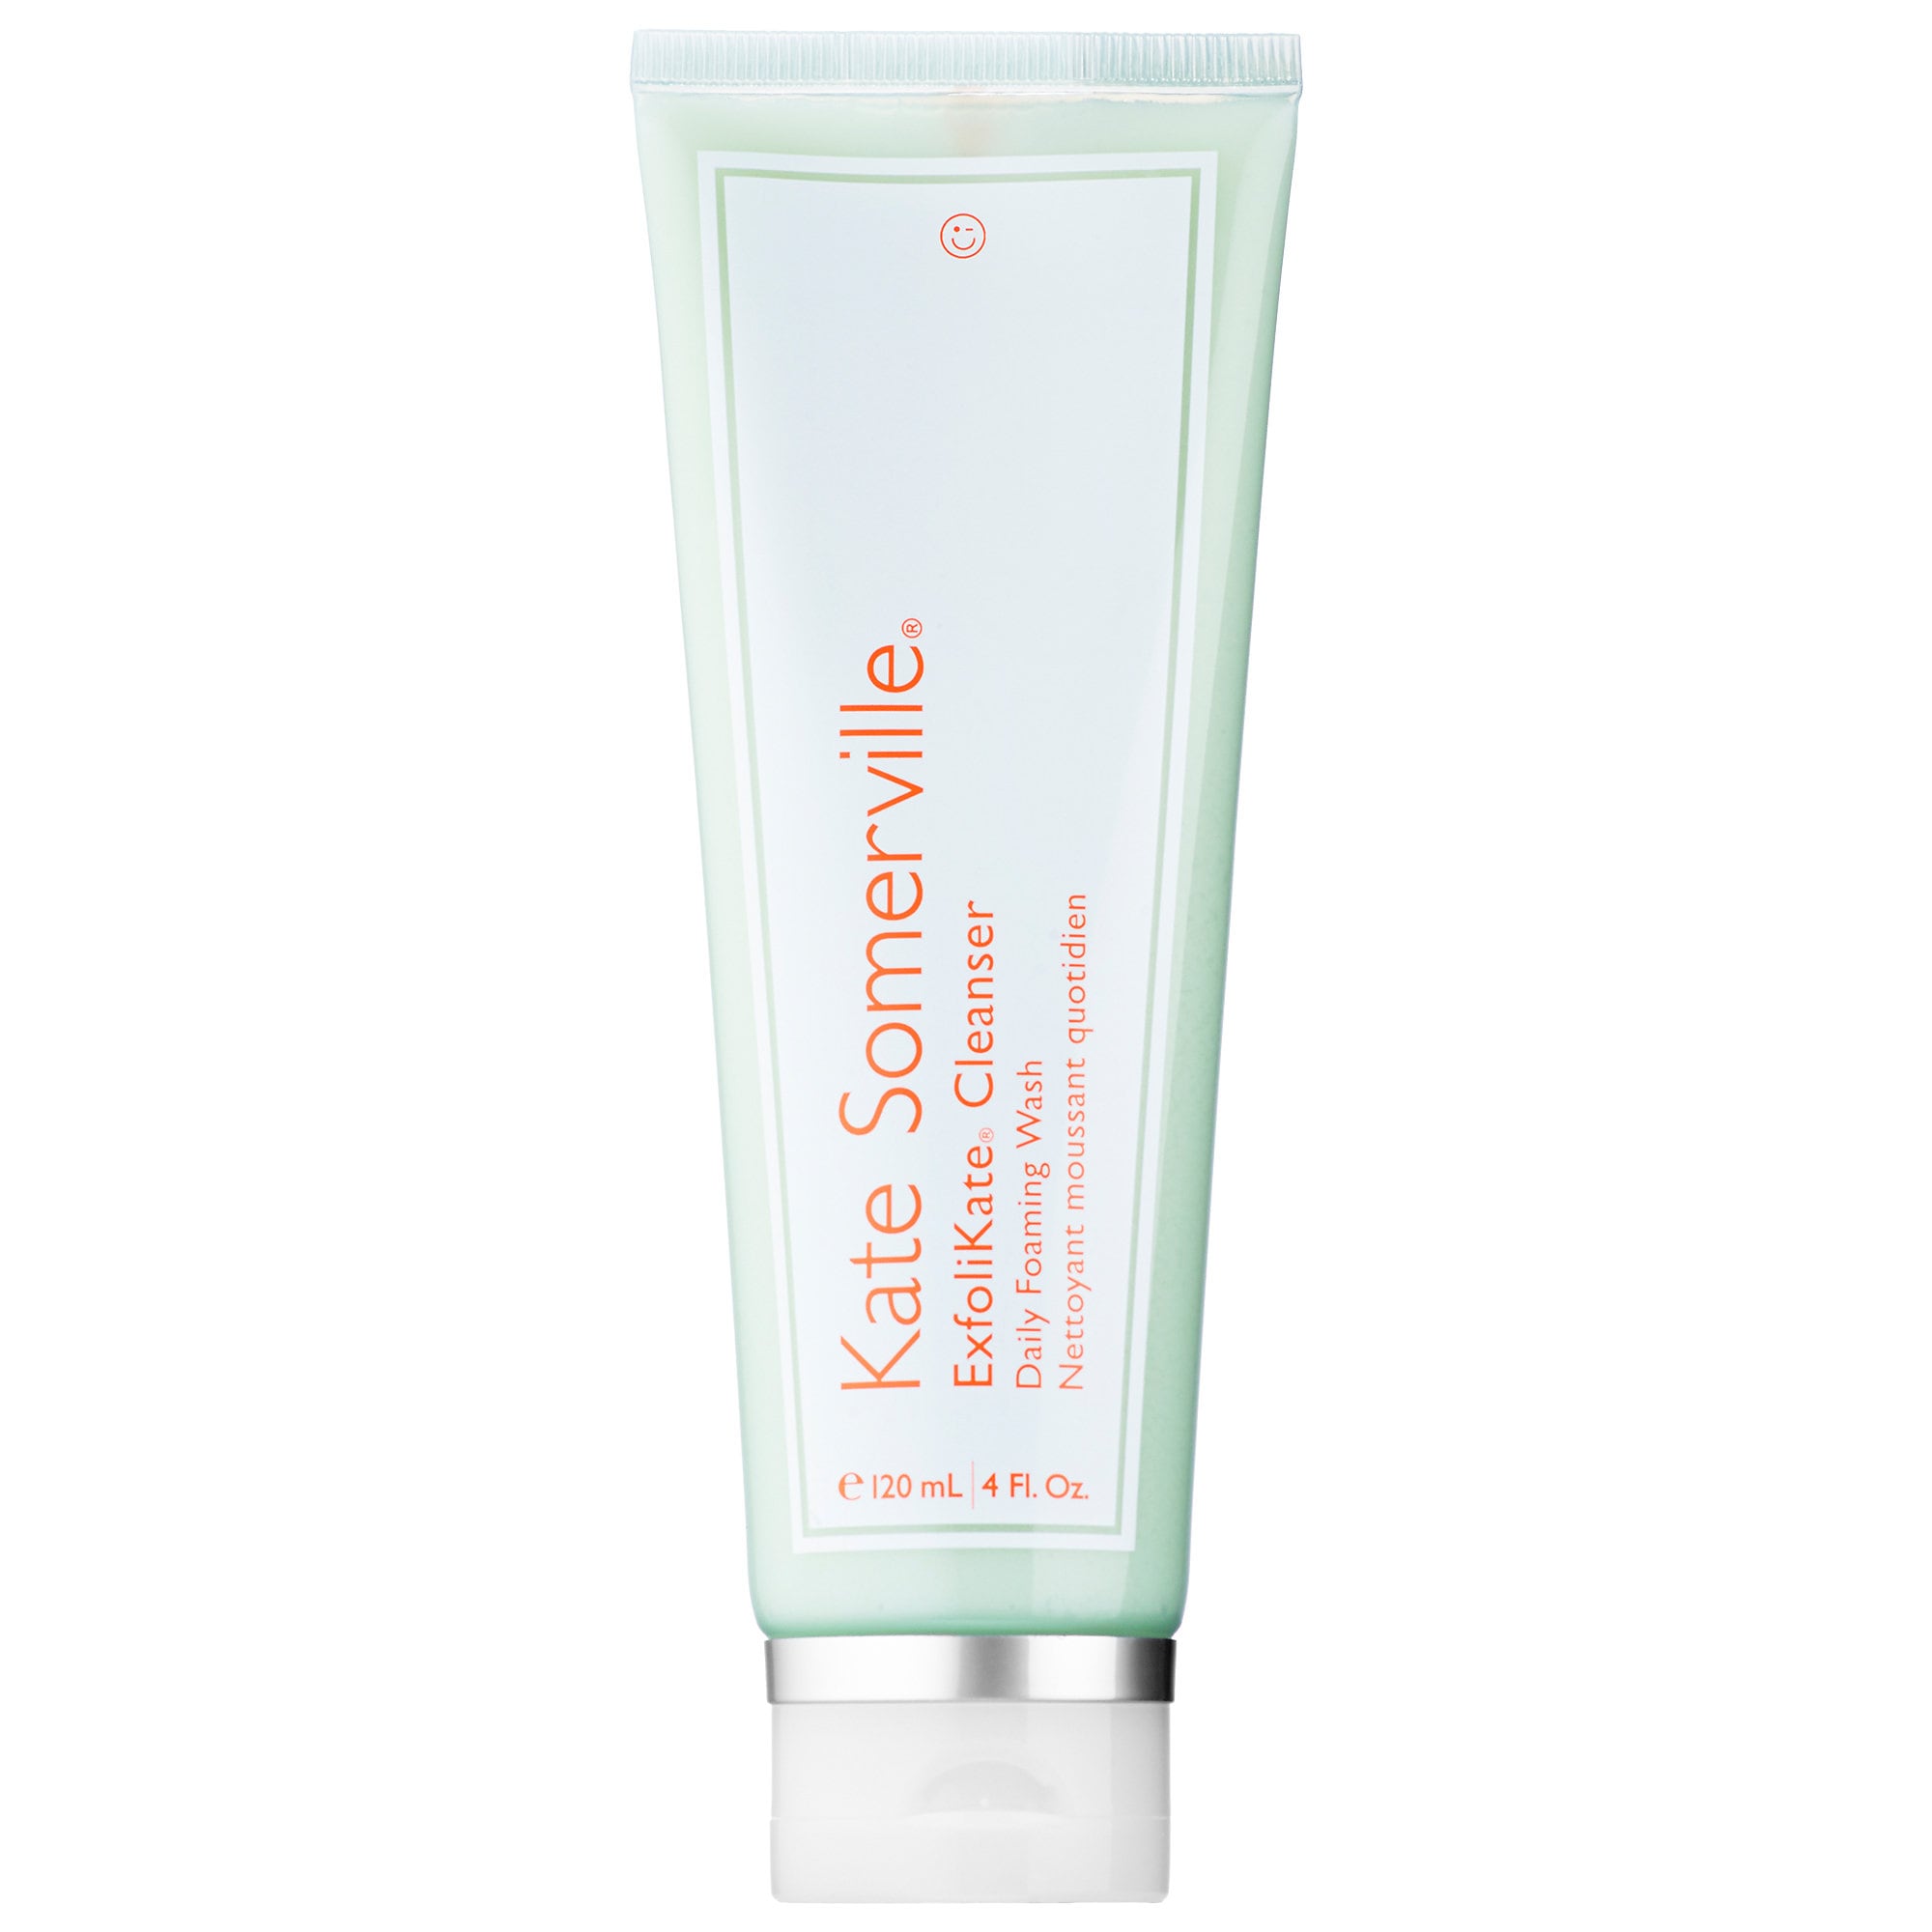 Kate Somerville Exfolikate Cleanser Daily Foaming Wash - 120ml